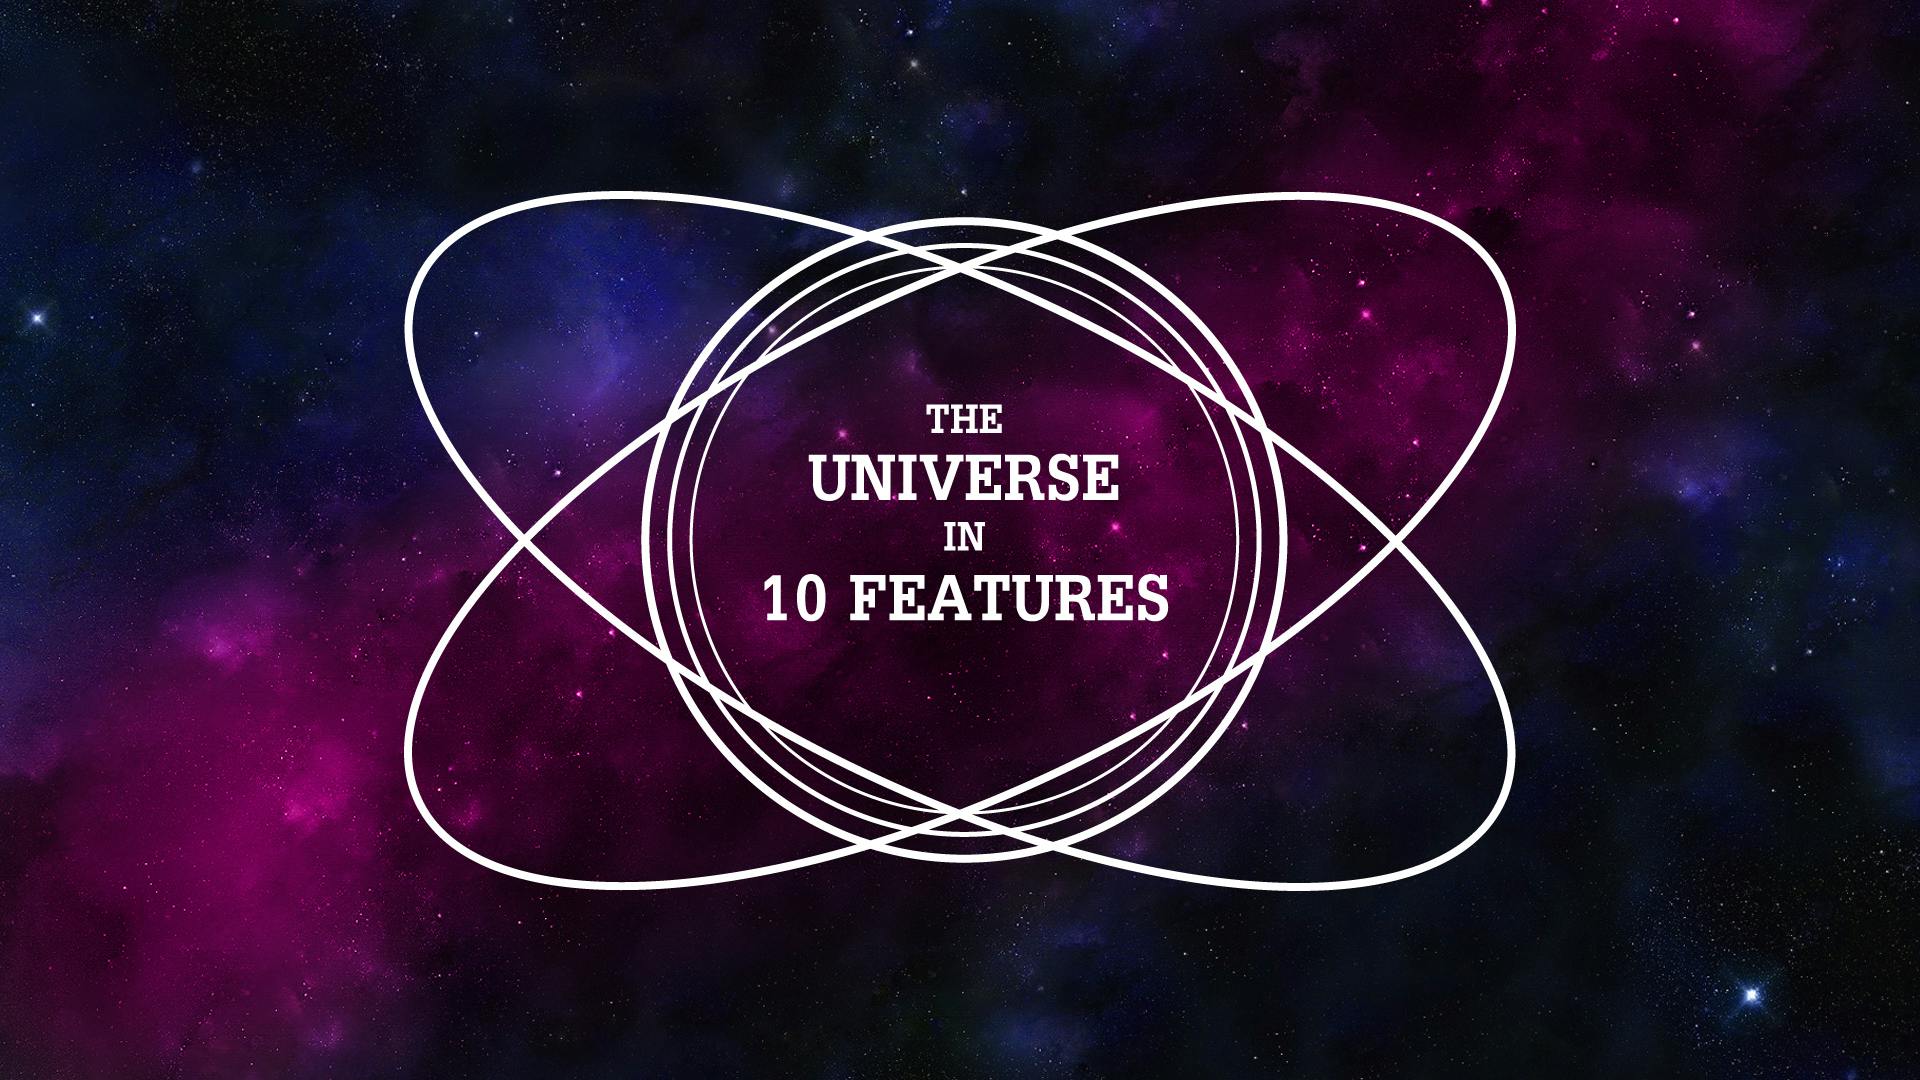 The Universe in 10 Features: 6. Spiral Galaxies